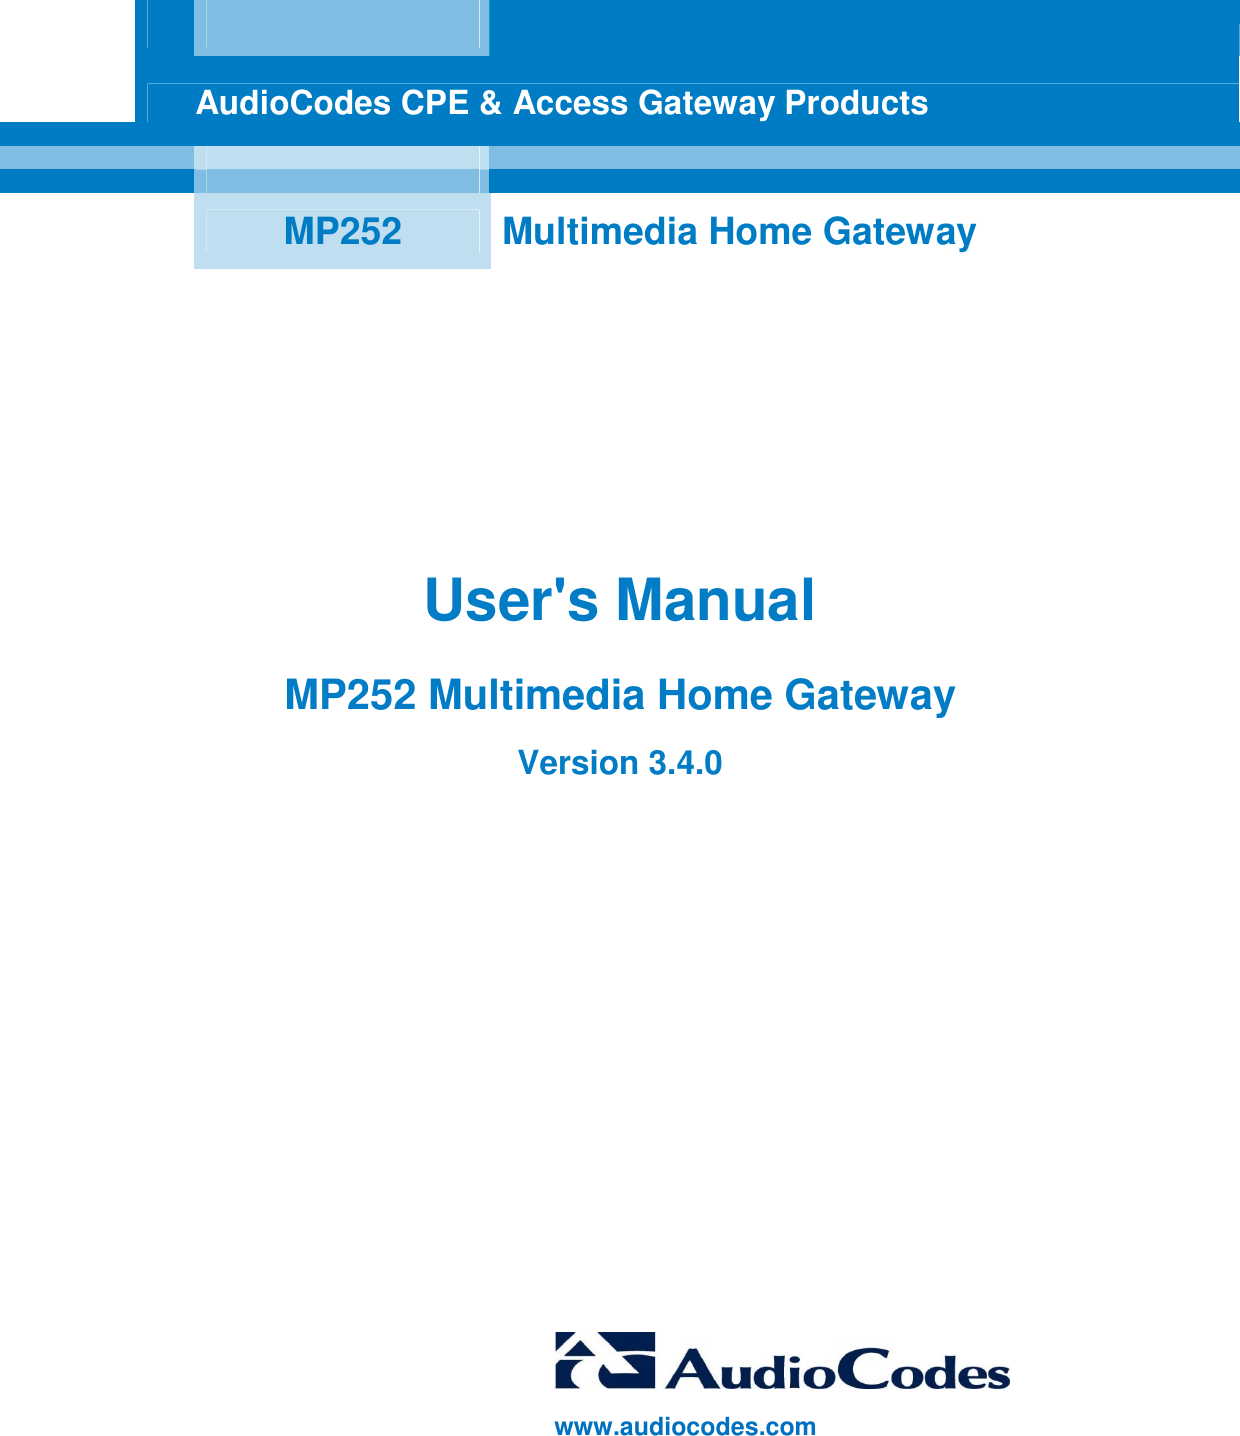      AudioCodes CPE &amp; Access Gateway Products        MP252  Multimedia Home Gateway     User&apos;s Manual MP252 Multimedia Home Gateway Version 3.4.0                            www.audiocodes.com   